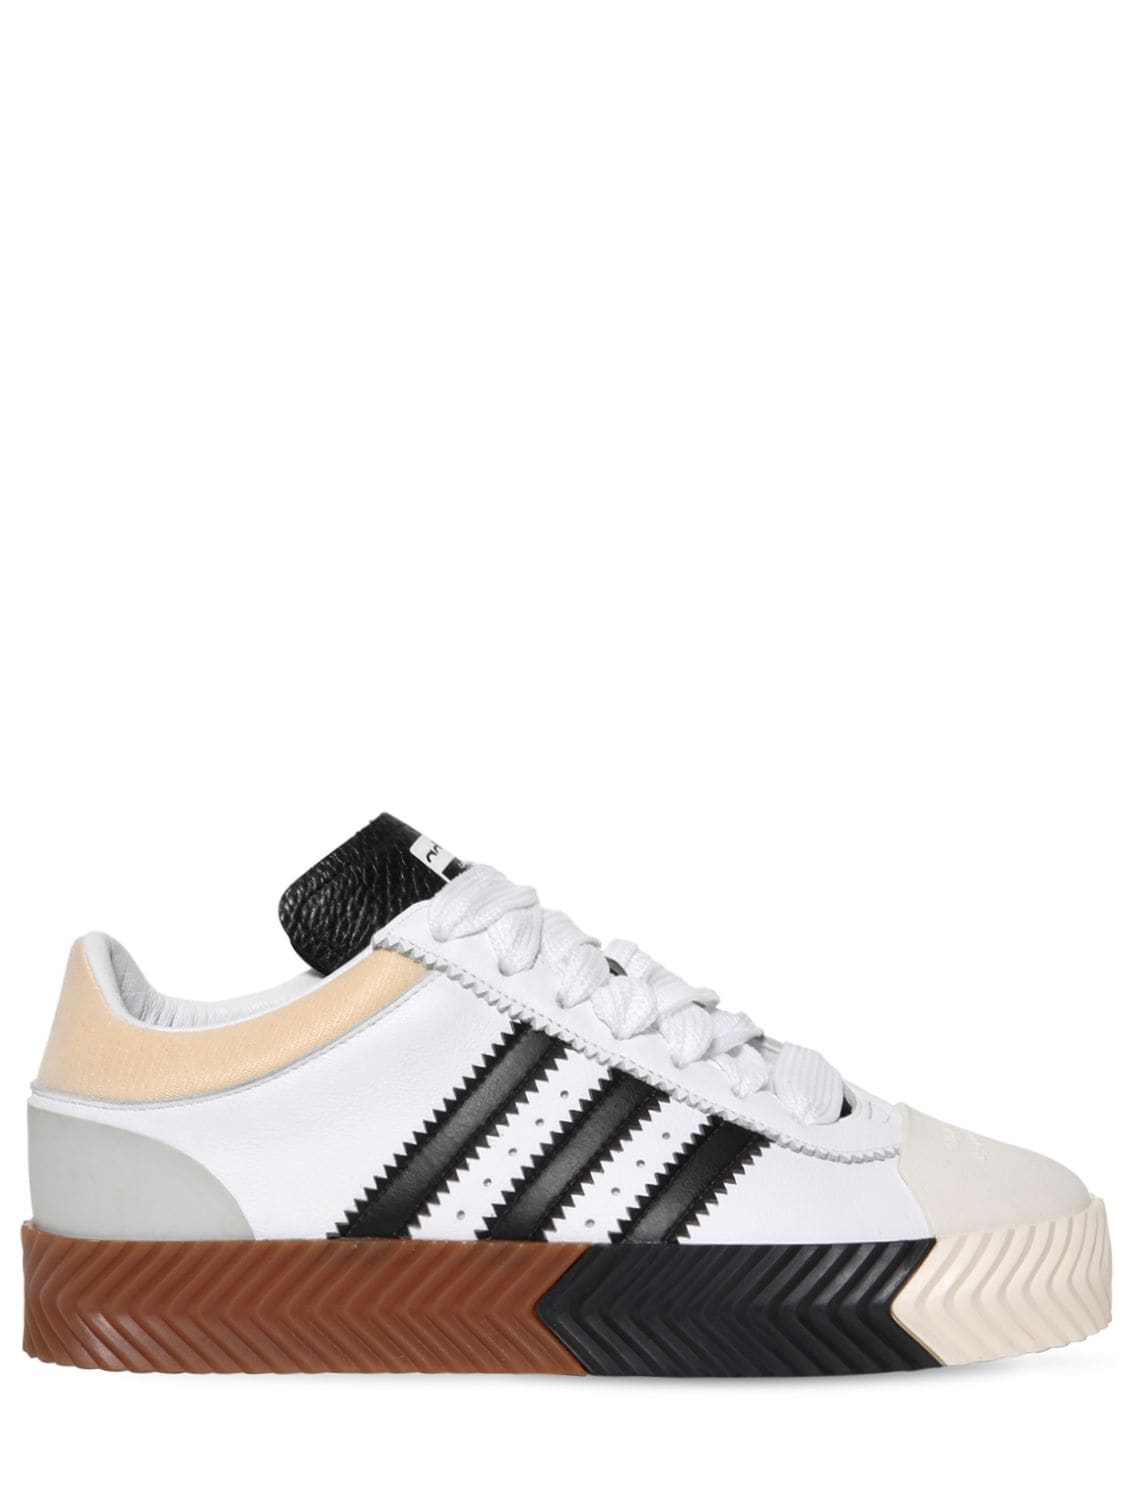 con man Explanation mourning Adidas Originals By Alexander Wang Aw Skate Super Leather Sneakers In White  | ModeSens